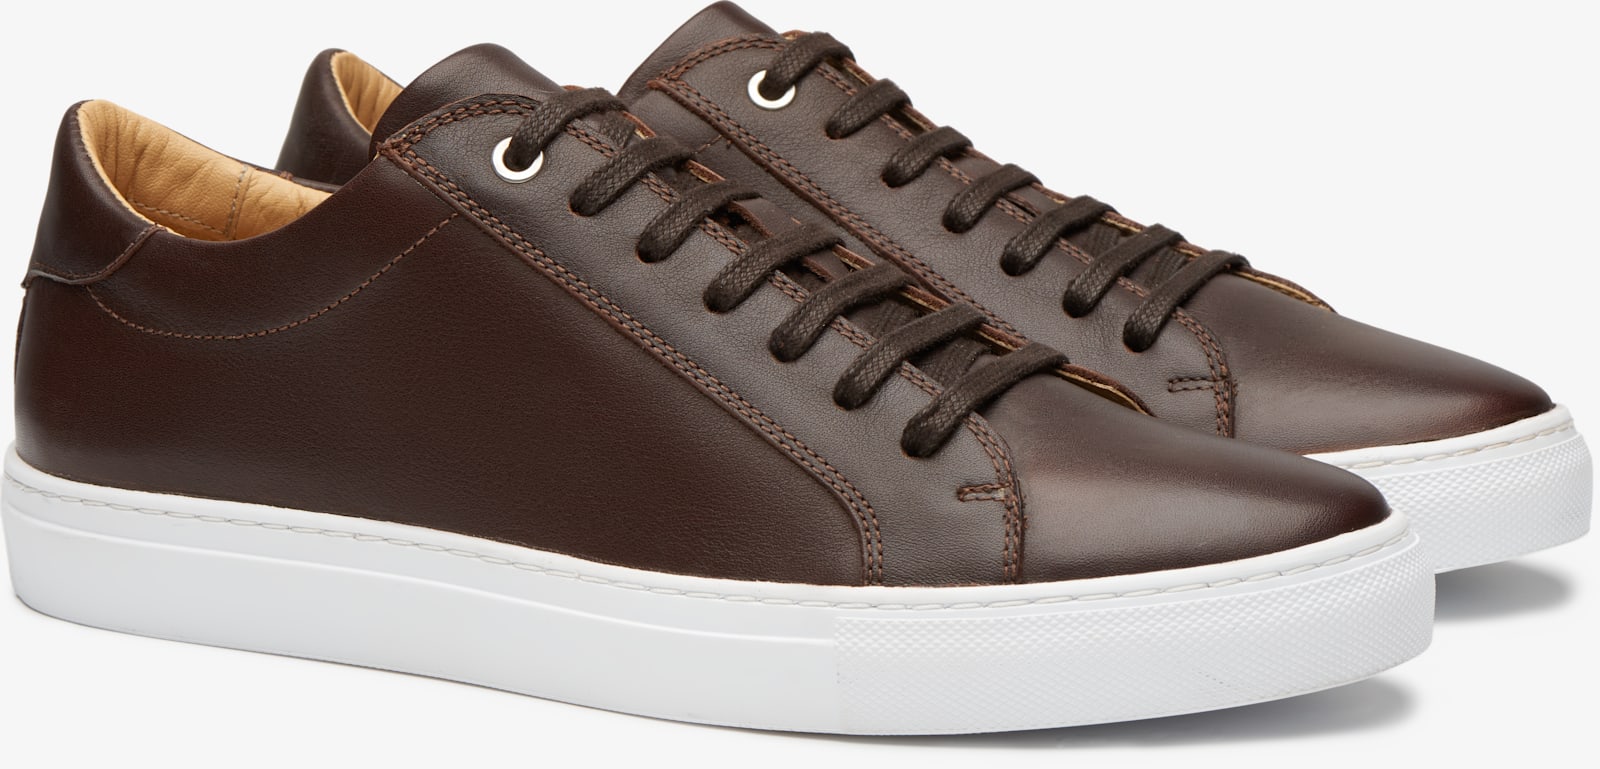 High quality leather sneakers in Europe? | Styleforum